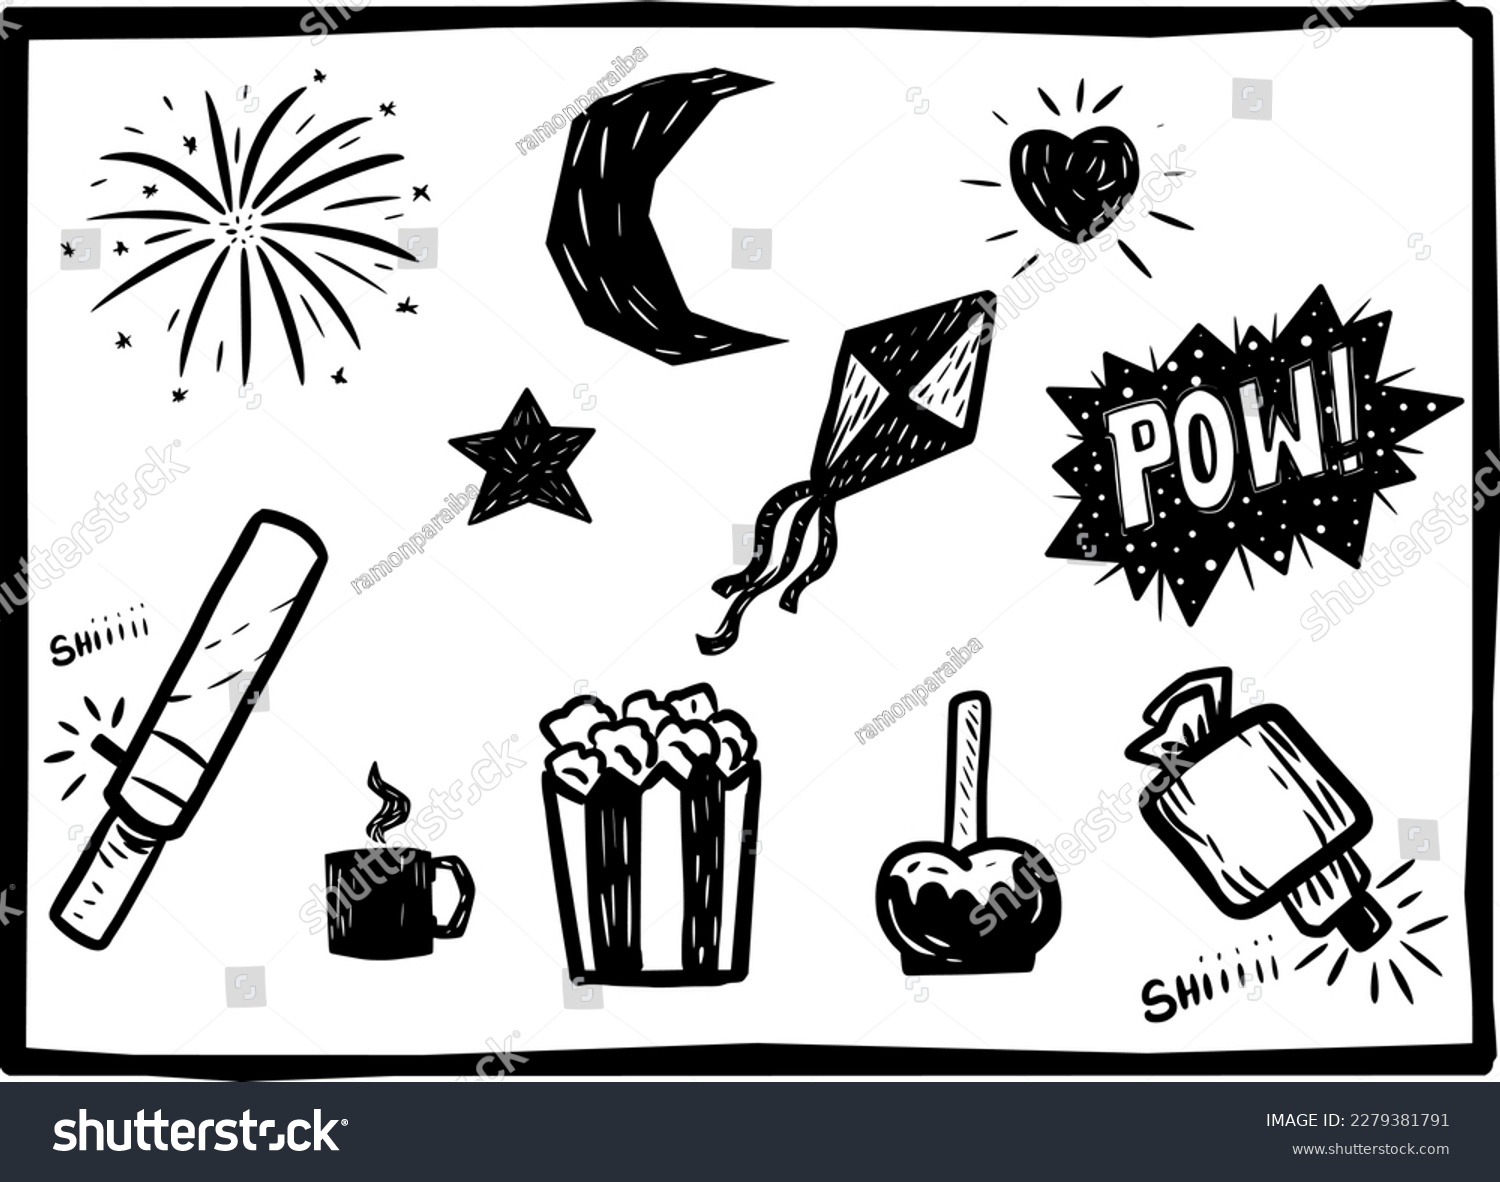 Festival elements. firecrackers, popcorn, party balloon. separate vectors in woodcut and cordel literature style. #2279381791